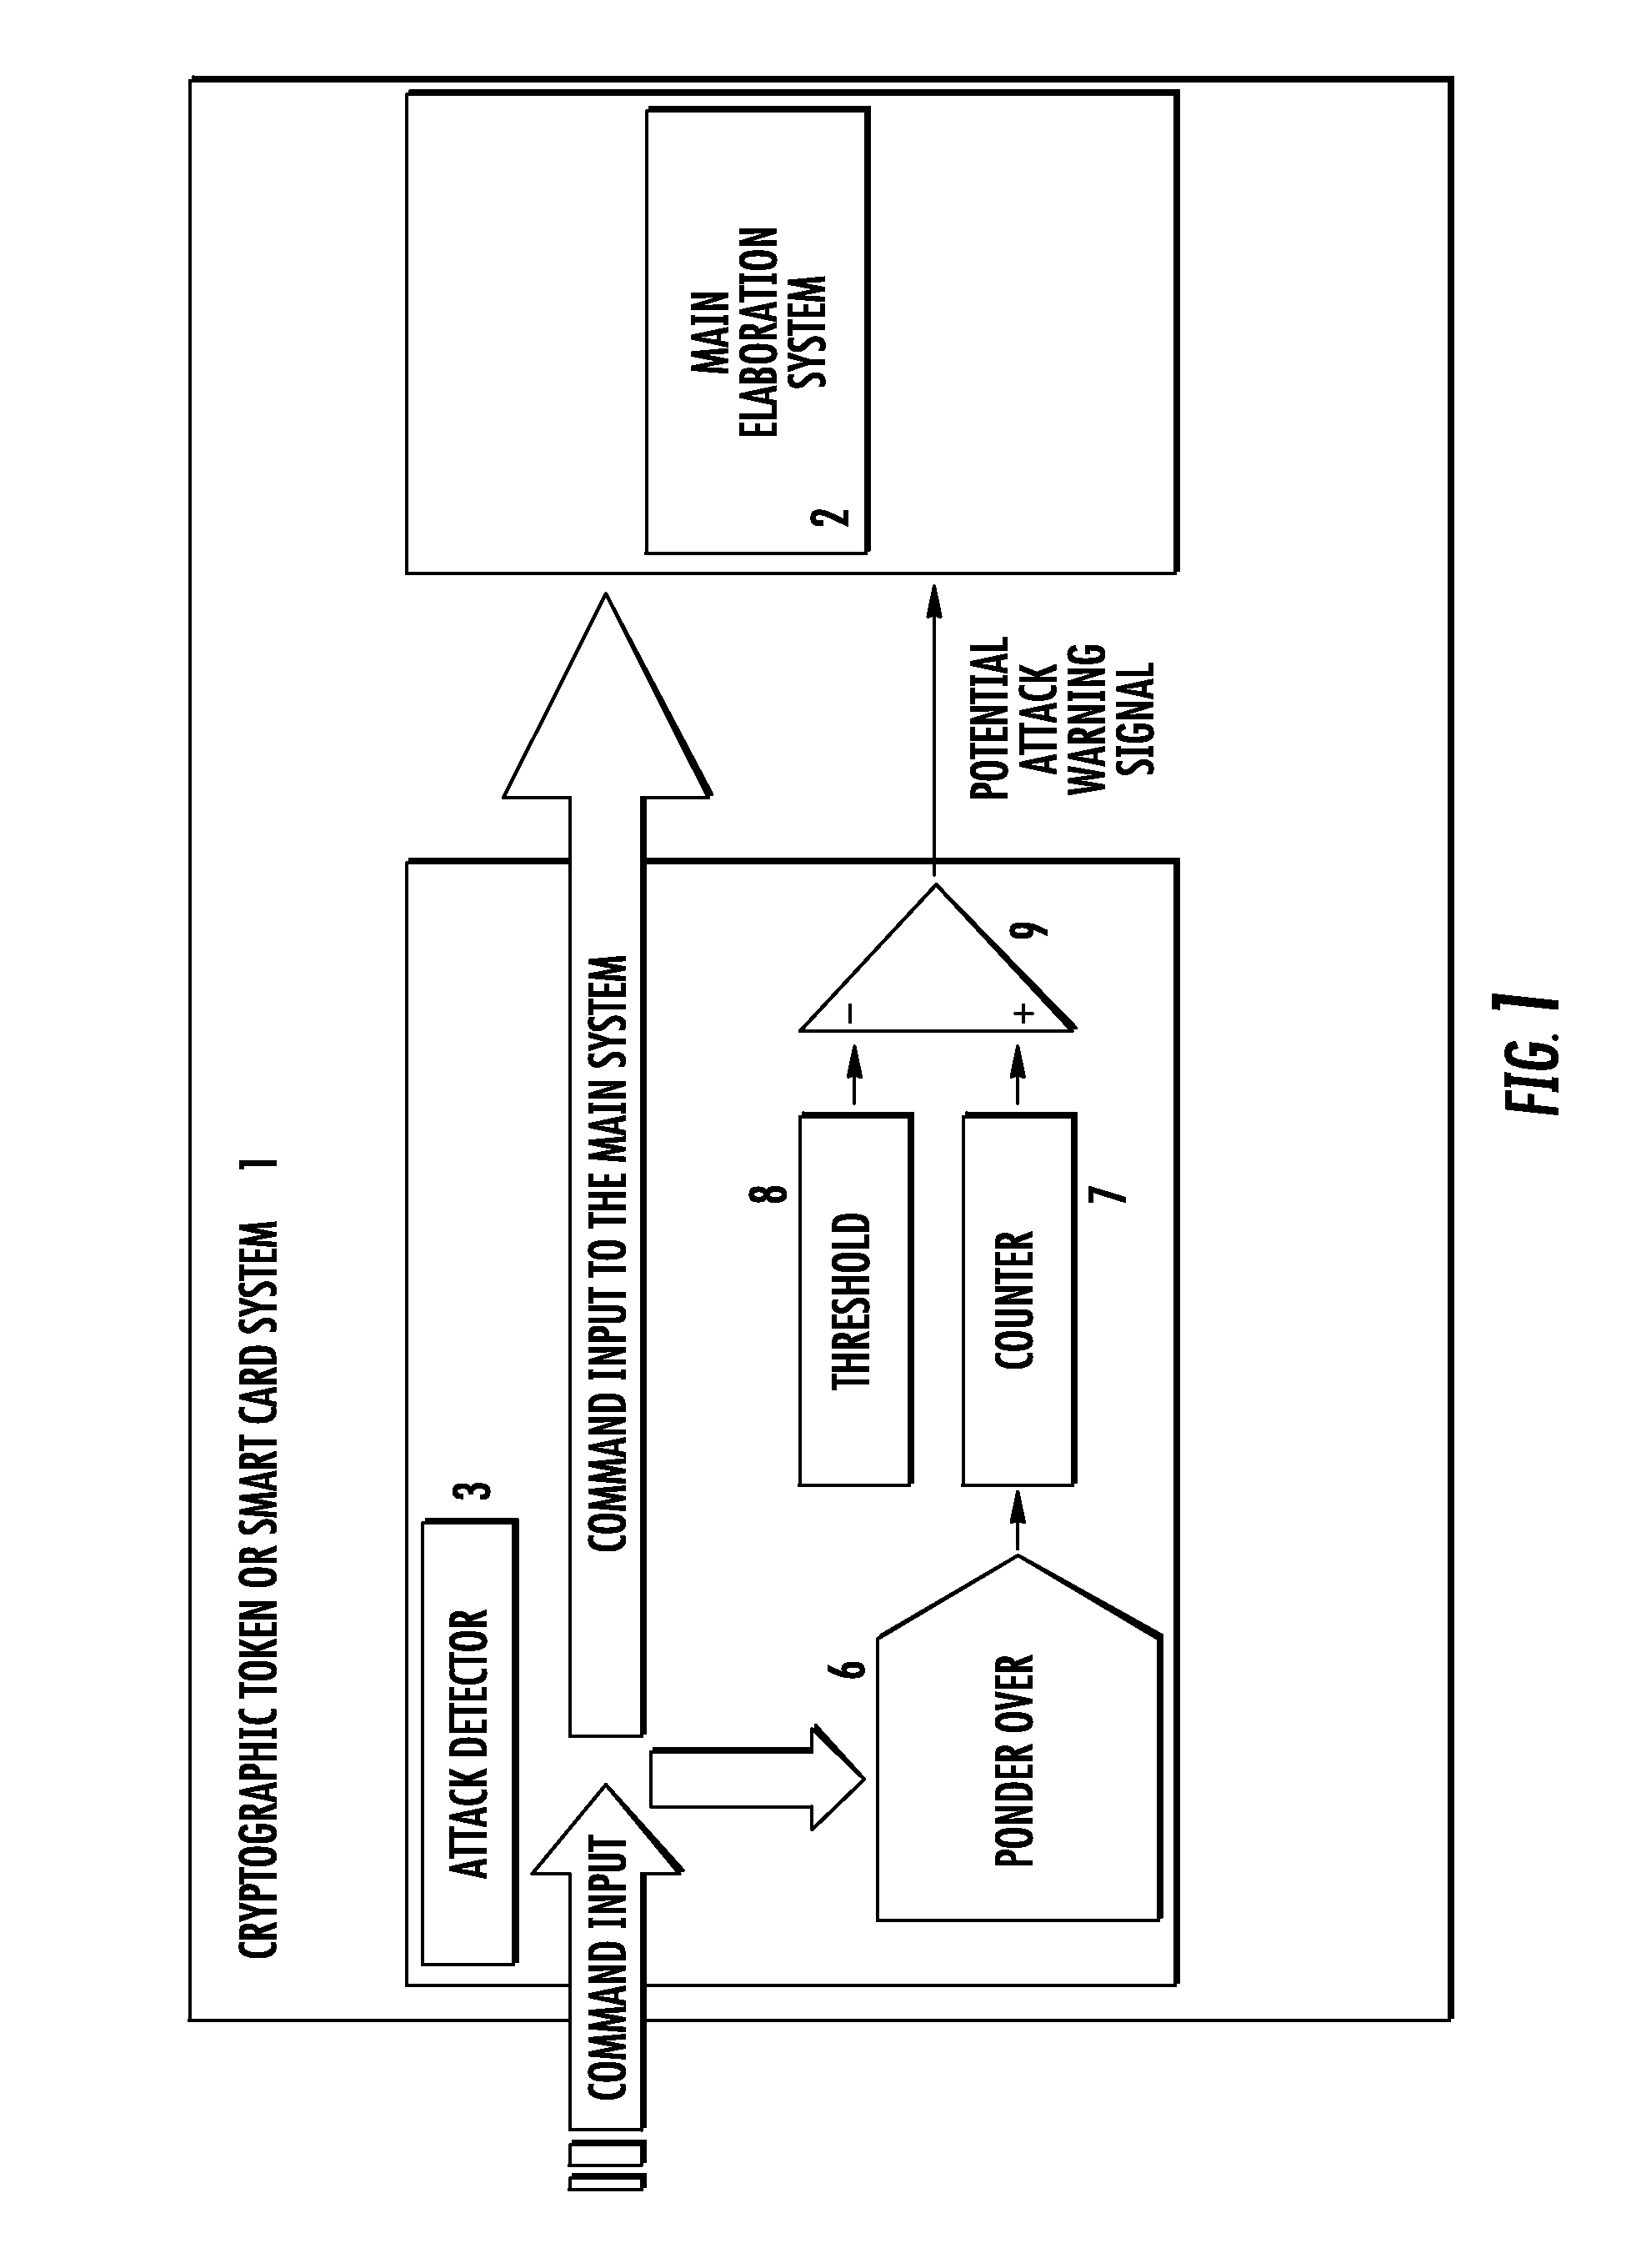 Method for detecting and reacting against possible attack to security enforcing operation performed by a cryptographic token or card